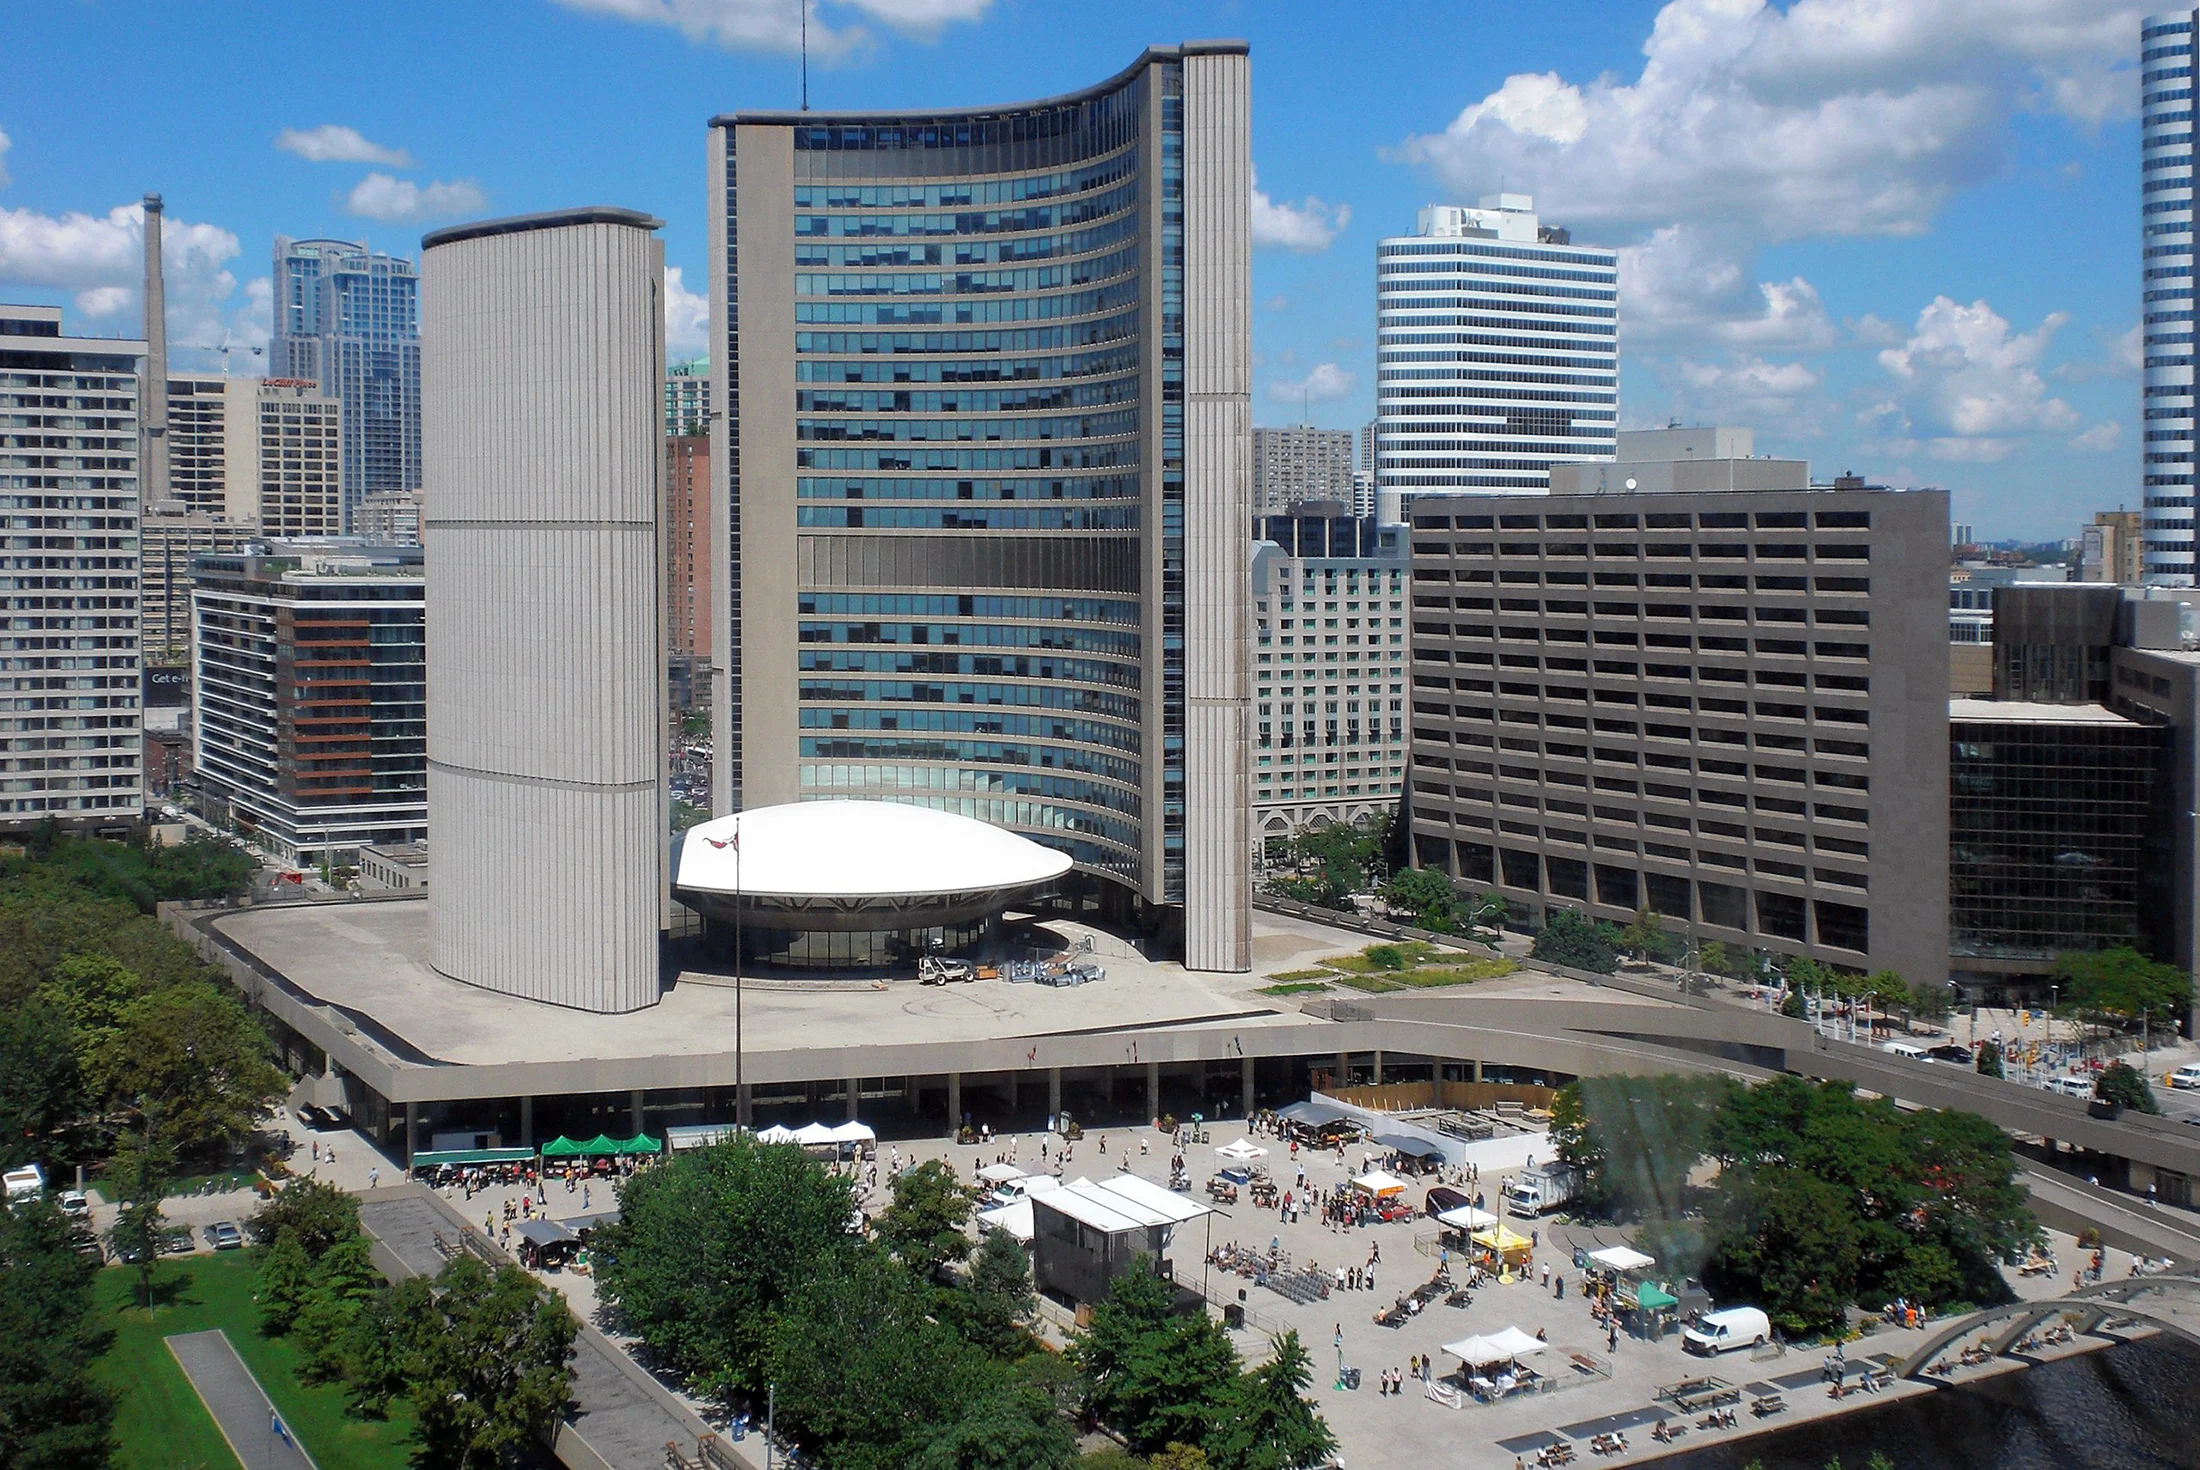 Toronto City Hall viewed from south showing towers and council chamber and public square